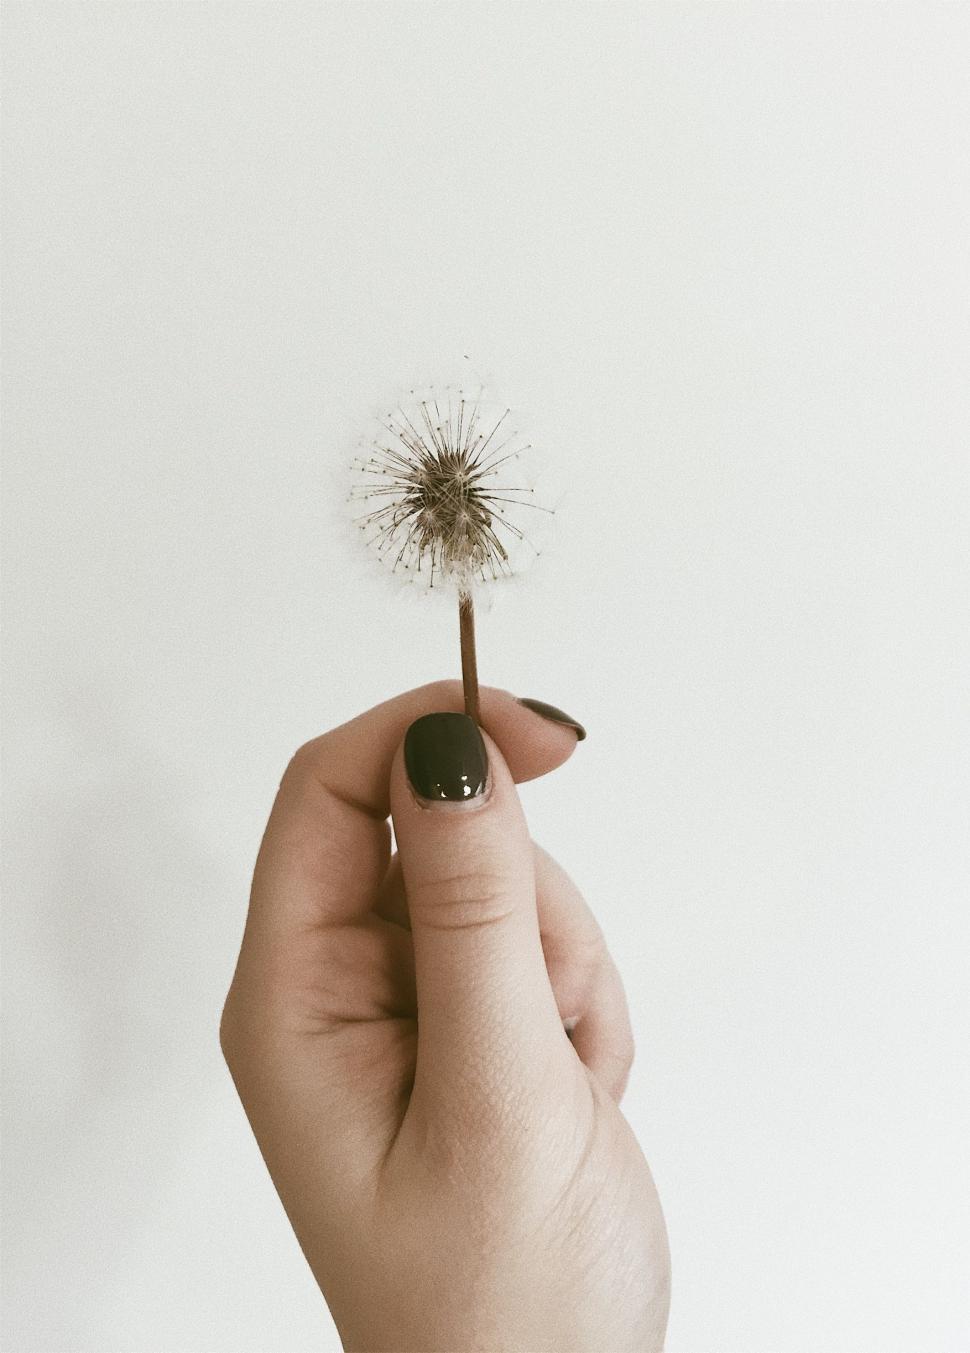 Free Image of Person Holding Dandelion in Hand 